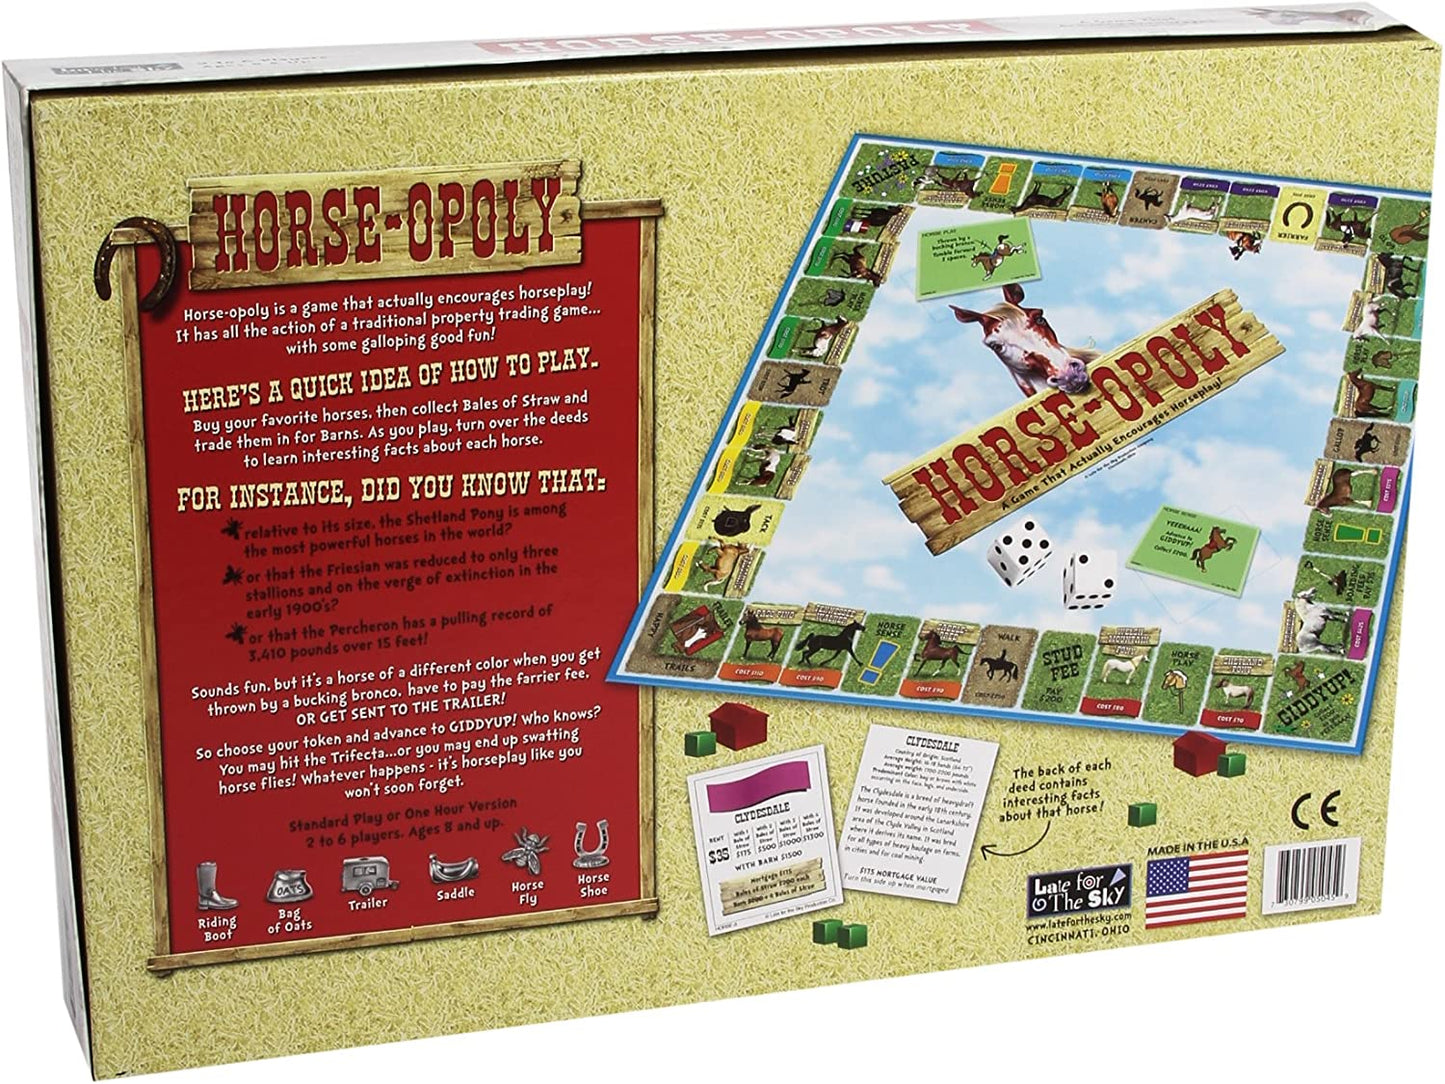 The back of the box for Horse-opoly.